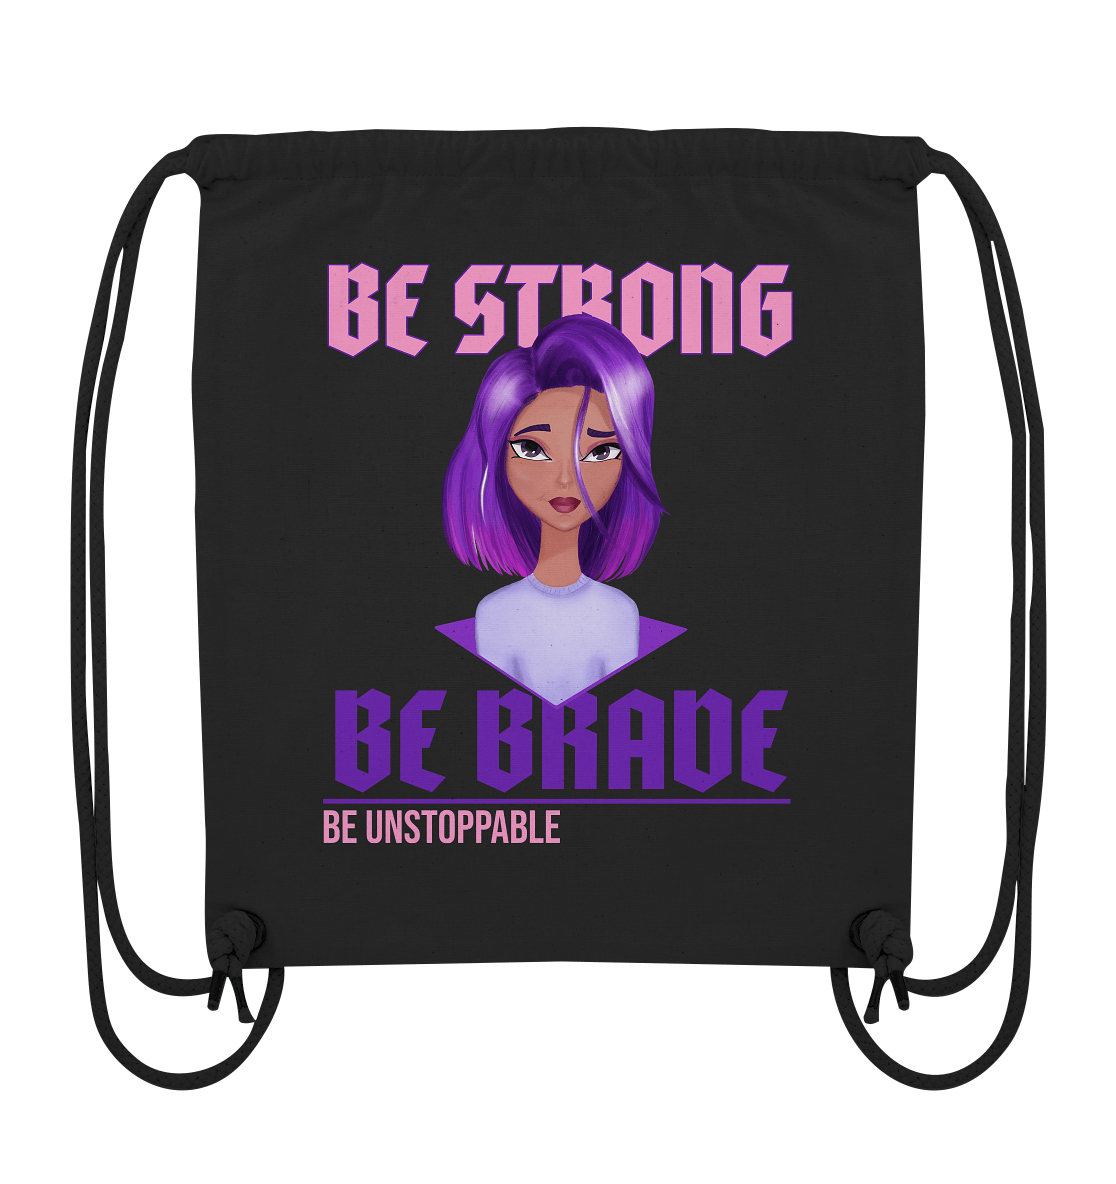 Rucksack in schwarz mit lila Cartoon "be strong be brave be unstoppable."